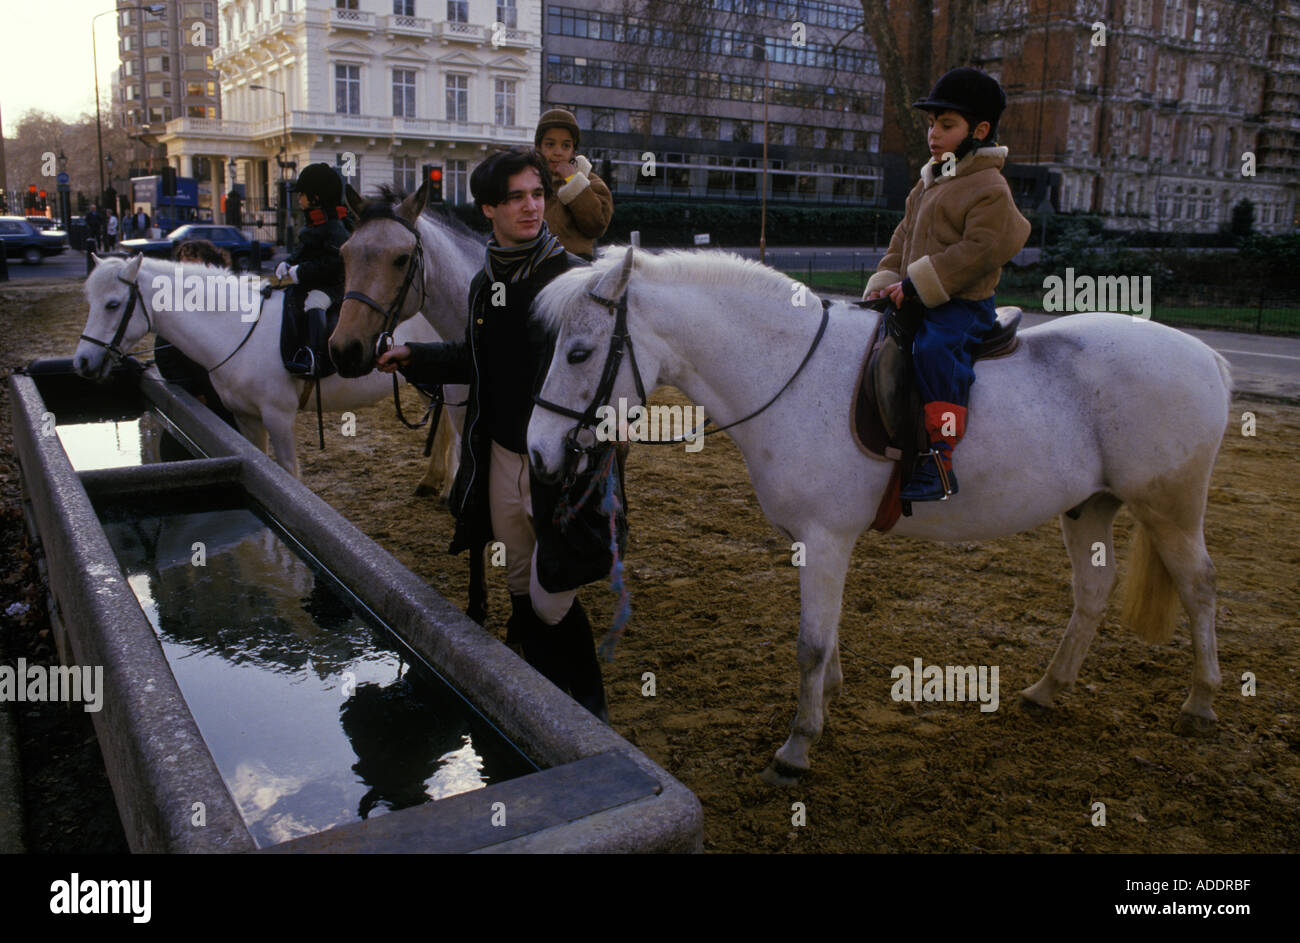 Rotten Row Hyde Park 1980s London. Children taking riding lessons in  Hyde Park, taking their horses to a water trough 1980 UK HOMER SYKES Stock Photo